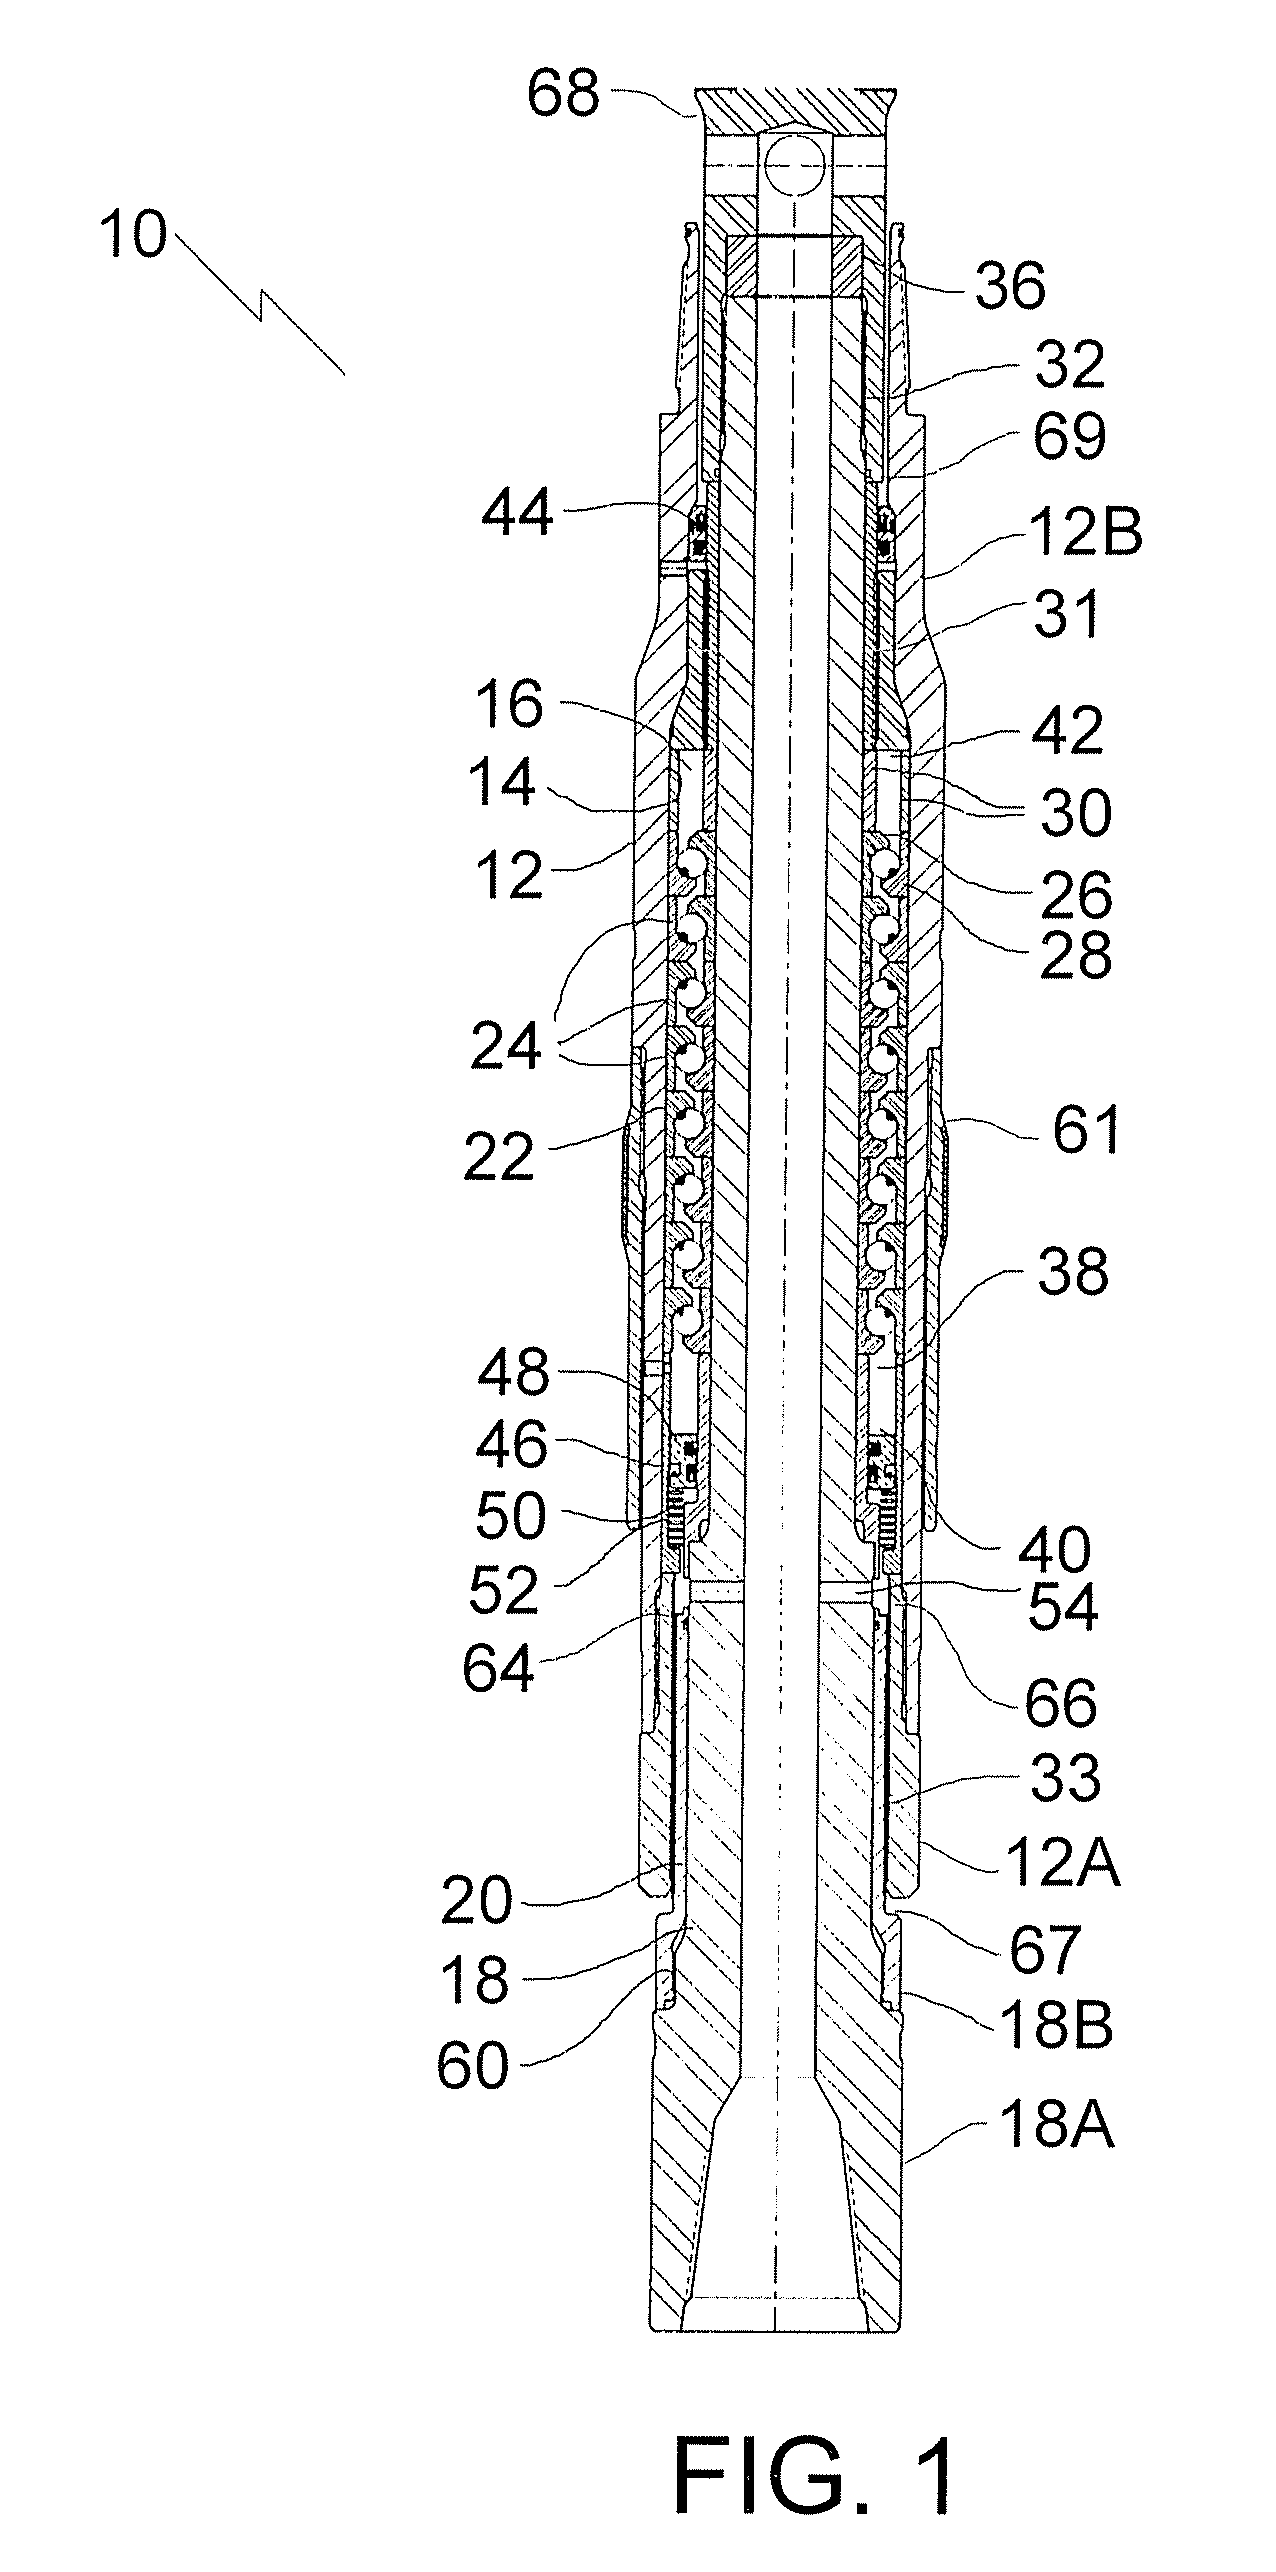 Method of providing a consistent preload on thrust bearings in a bearing assembly